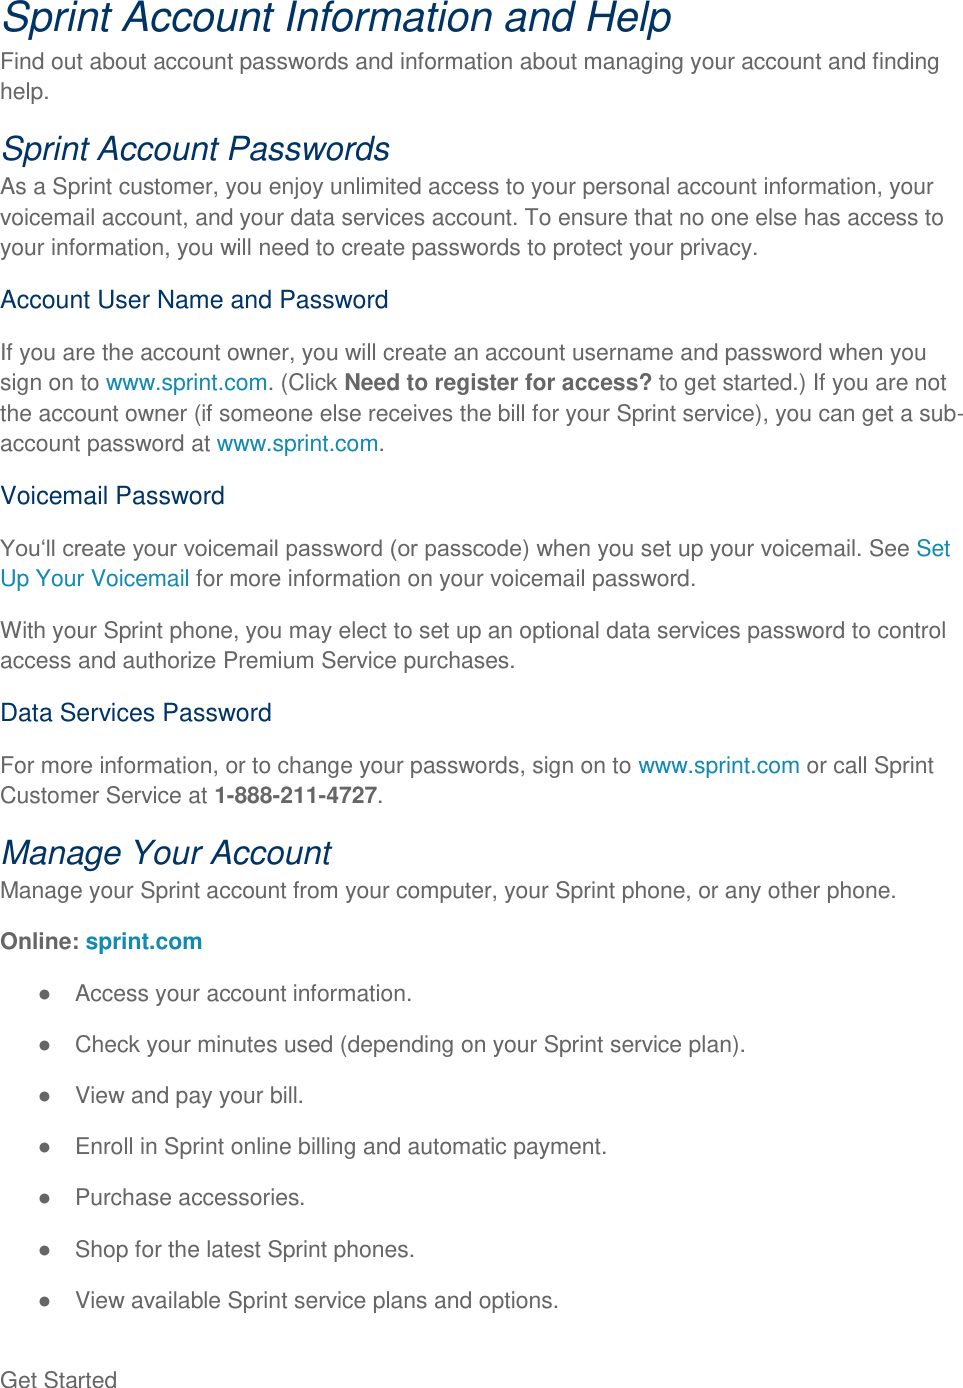 Get Started   Sprint Account Information and Help Find out about account passwords and information about managing your account and finding help. Sprint Account Passwords As a Sprint customer, you enjoy unlimited access to your personal account information, your voicemail account, and your data services account. To ensure that no one else has access to your information, you will need to create passwords to protect your privacy. Account User Name and Password If you are the account owner, you will create an account username and password when you sign on to www.sprint.com. (Click Need to register for access? to get started.) If you are not the account owner (if someone else receives the bill for your Sprint service), you can get a sub-account password at www.sprint.com. Voicemail Password ) when you set up your voicemail. See Set Up Your Voicemail for more information on your voicemail password. With your Sprint phone, you may elect to set up an optional data services password to control access and authorize Premium Service purchases. Data Services Password For more information, or to change your passwords, sign on to www.sprint.com or call Sprint Customer Service at 1-888-211-4727. Manage Your Account Manage your Sprint account from your computer, your Sprint phone, or any other phone. Online: sprint.com   Access your account information.   Check your minutes used (depending on your Sprint service plan).   View and pay your bill.   Enroll in Sprint online billing and automatic payment.   Purchase accessories.   Shop for the latest Sprint phones.   View available Sprint service plans and options. 